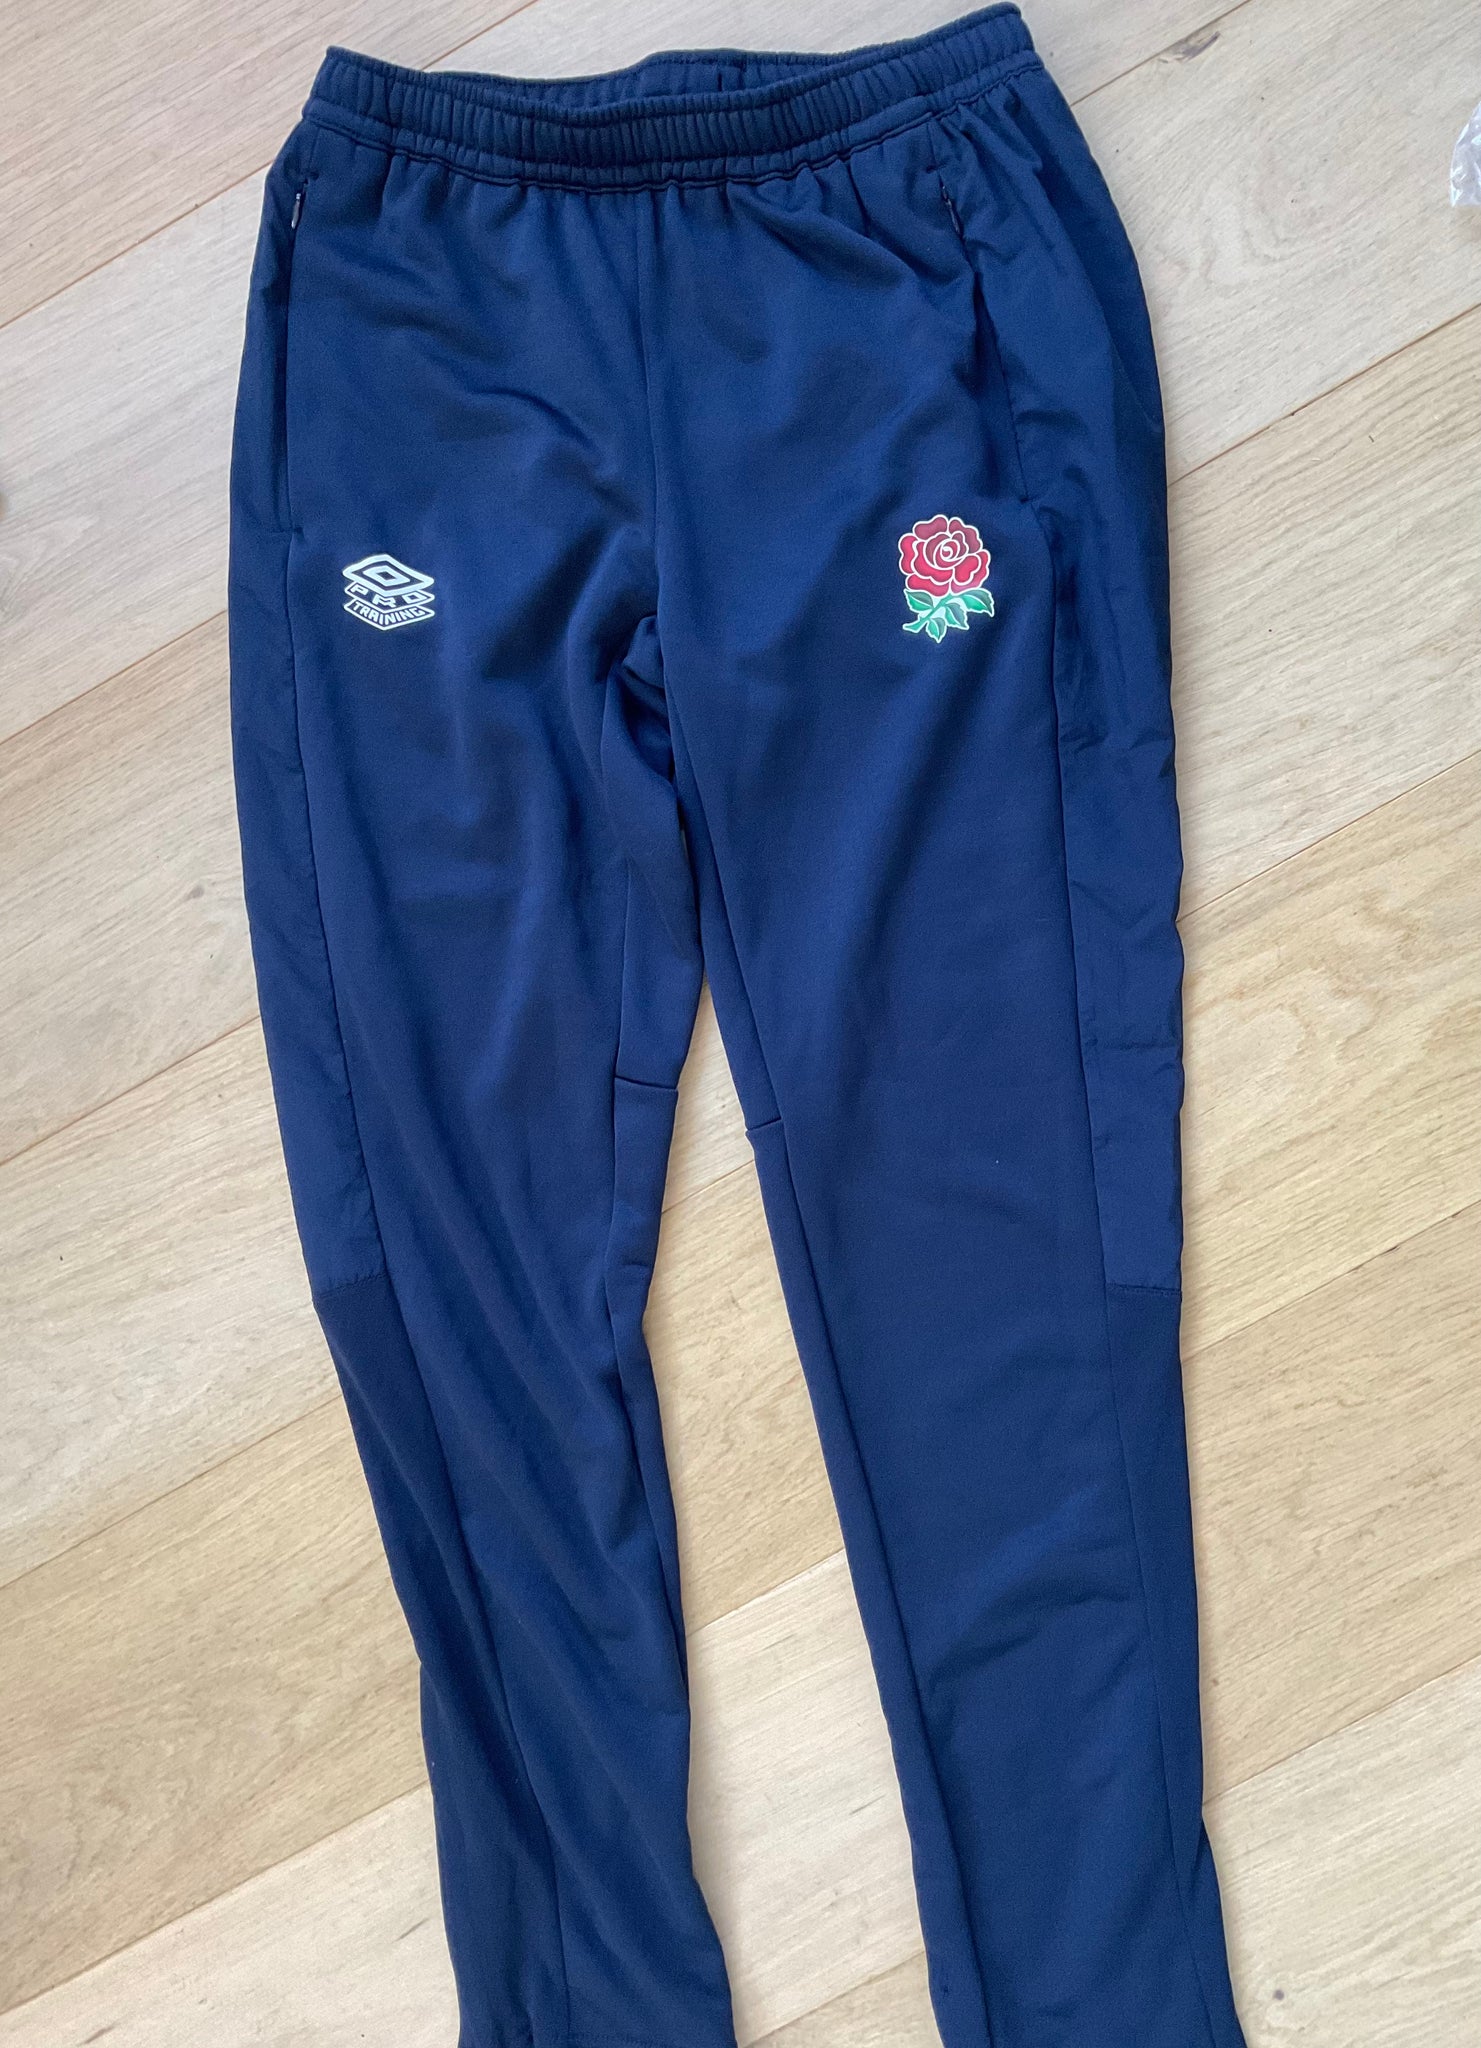 England Rugby Jogging Pants [Blue]